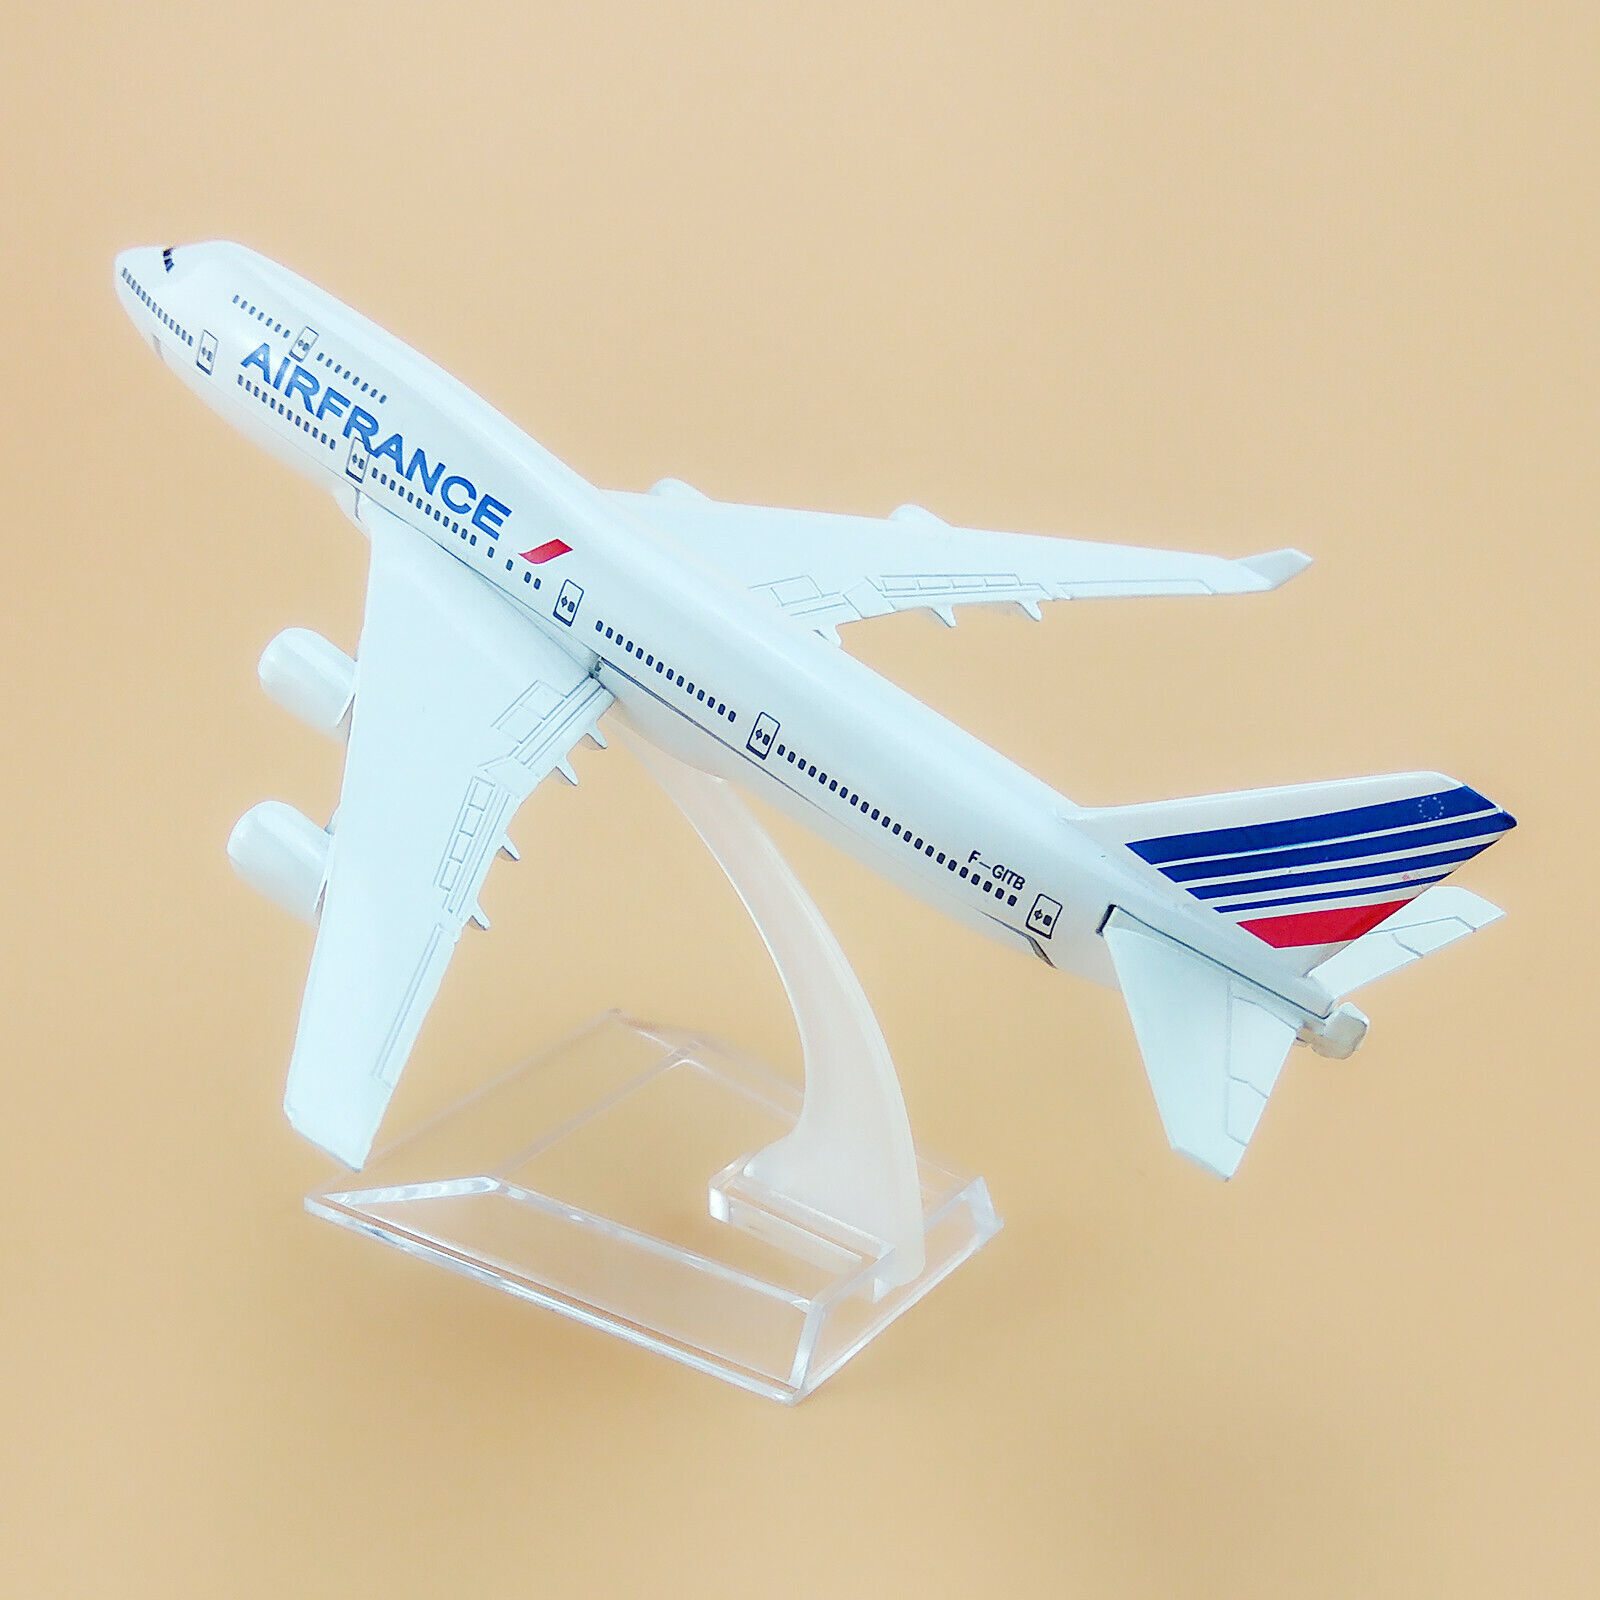  Air France Boeing B747 Airlines Airplane Model Plane Metal Aircraft Alloy 16cm